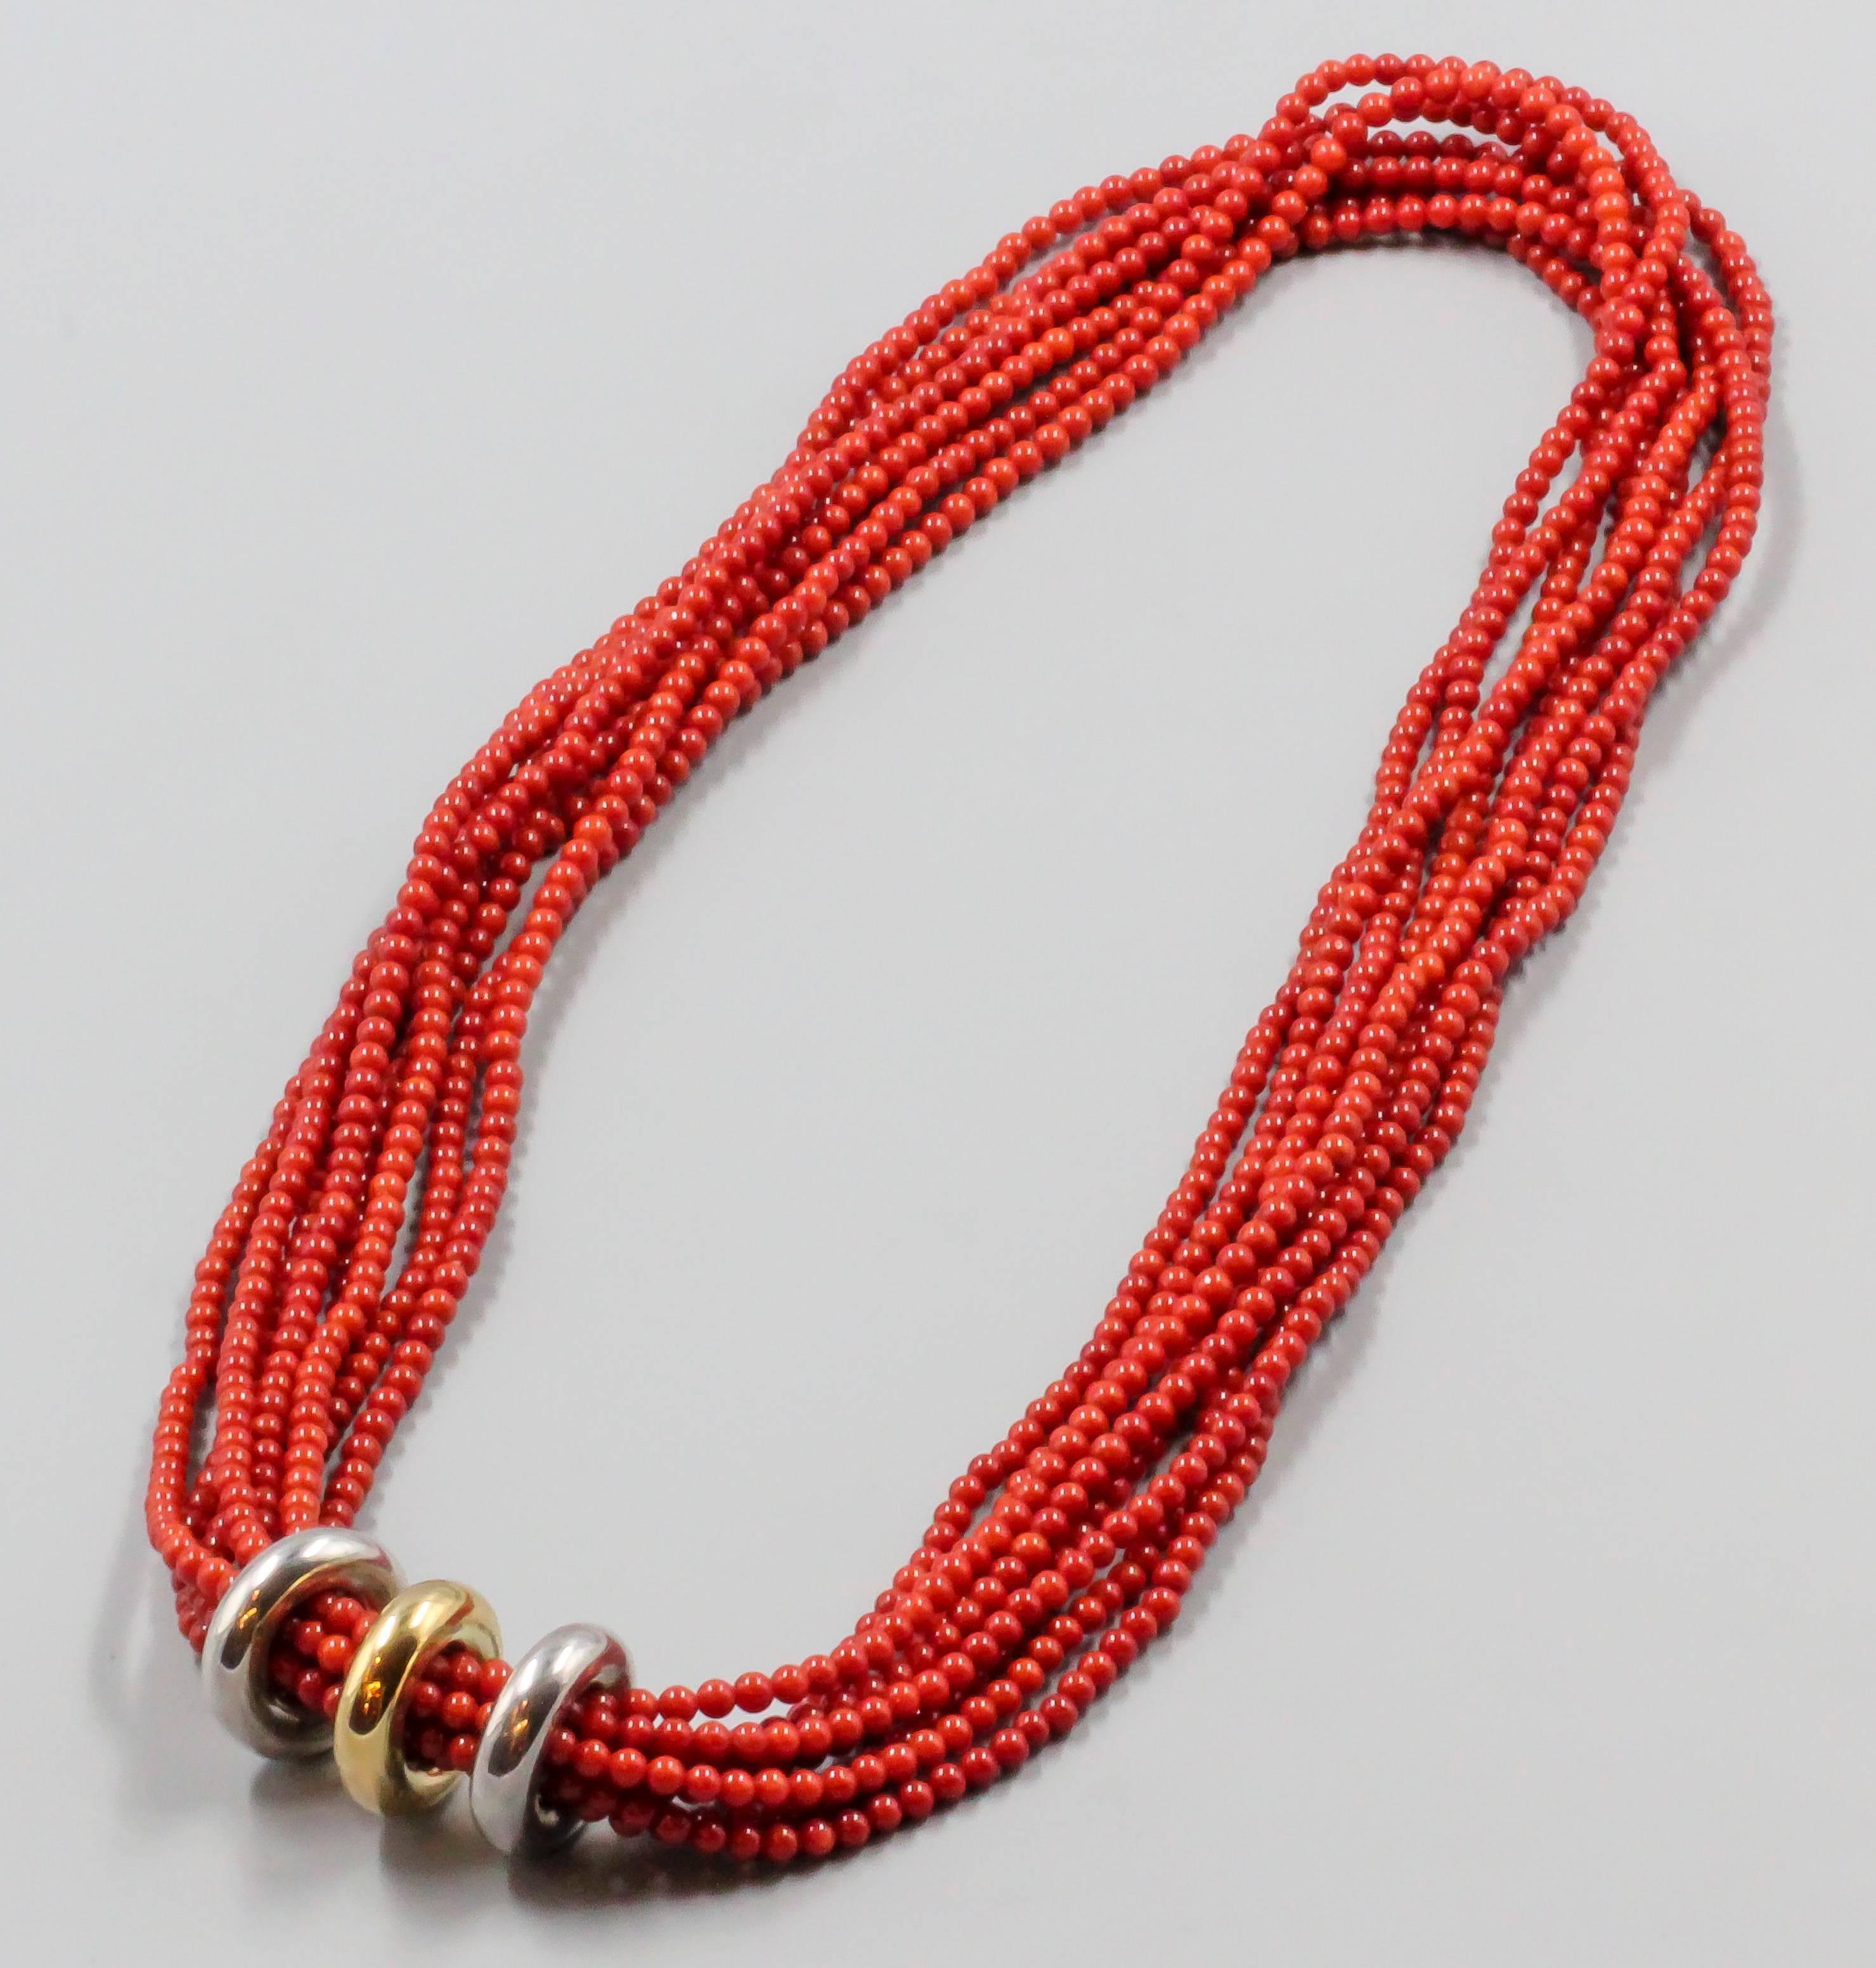 Chic coral and white & yellow 18K gold necklace by Poiray. It features 8 strands of rich red coral , each bead approx 4mm diameter. Accentuated by a three piece rondelle, each of which can be moved and spaced separately. Beautifully made and very